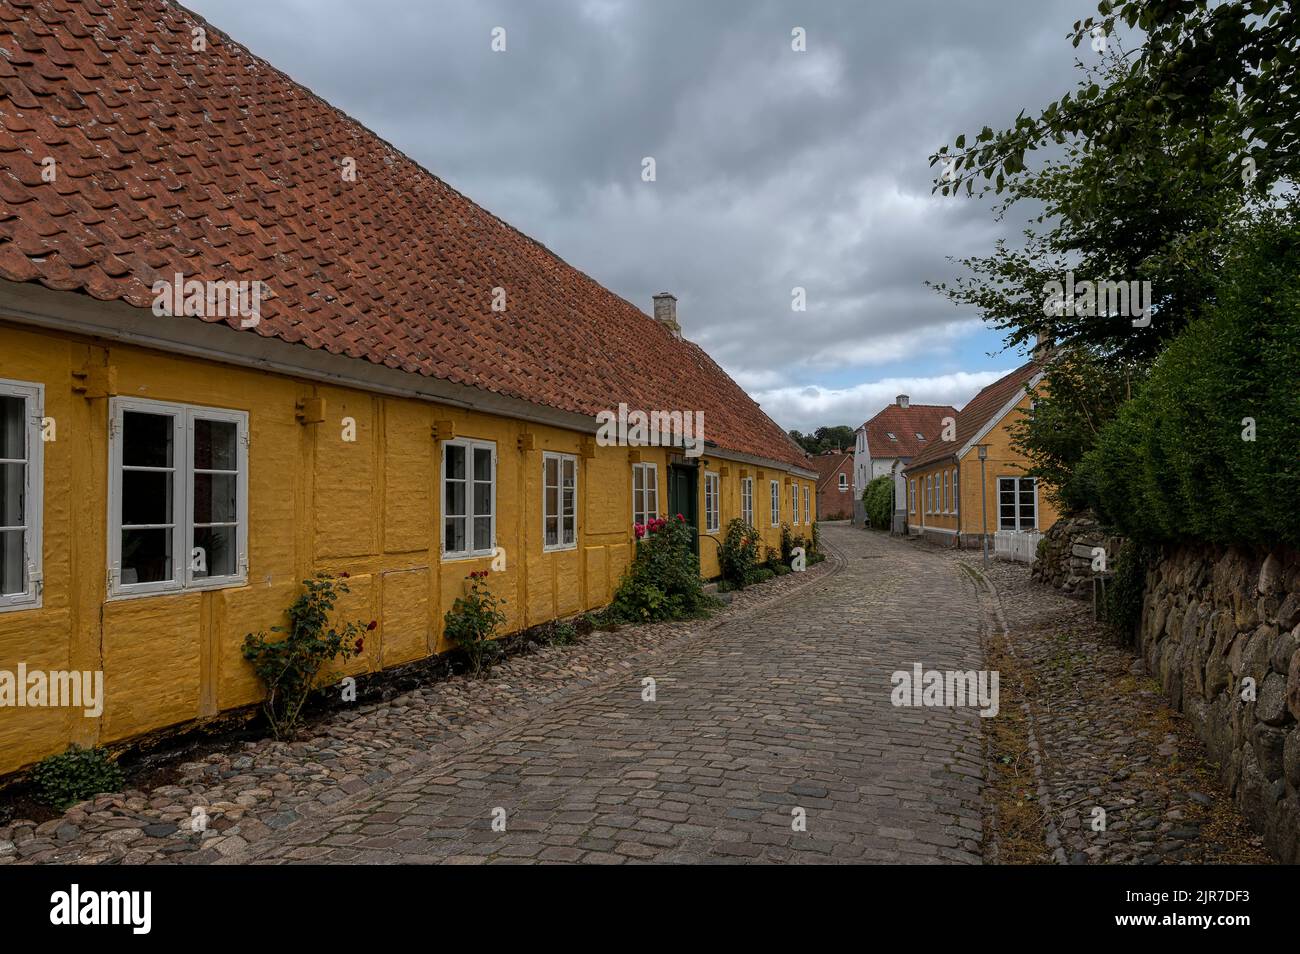 yellow half-timbered picturesque house on a cobbled street in the dansih town Mariager, Denmark, August 6, 2022 Stock Photo